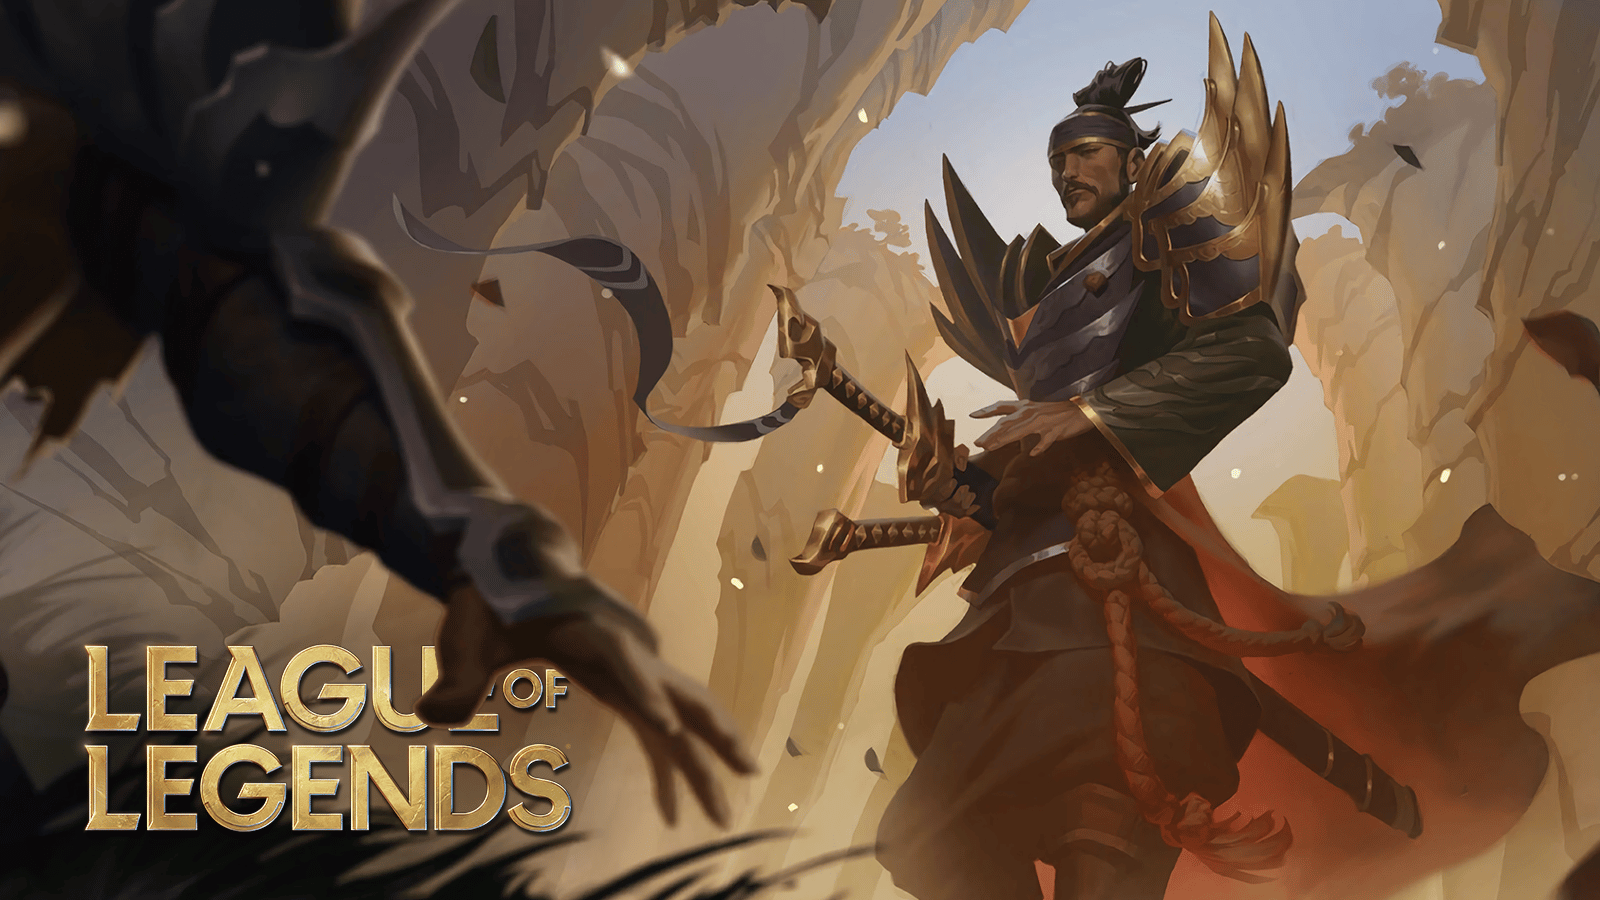 Yasuo's brother Yone could be the first Legends of Runeterra character to make the switch to League of Legends.